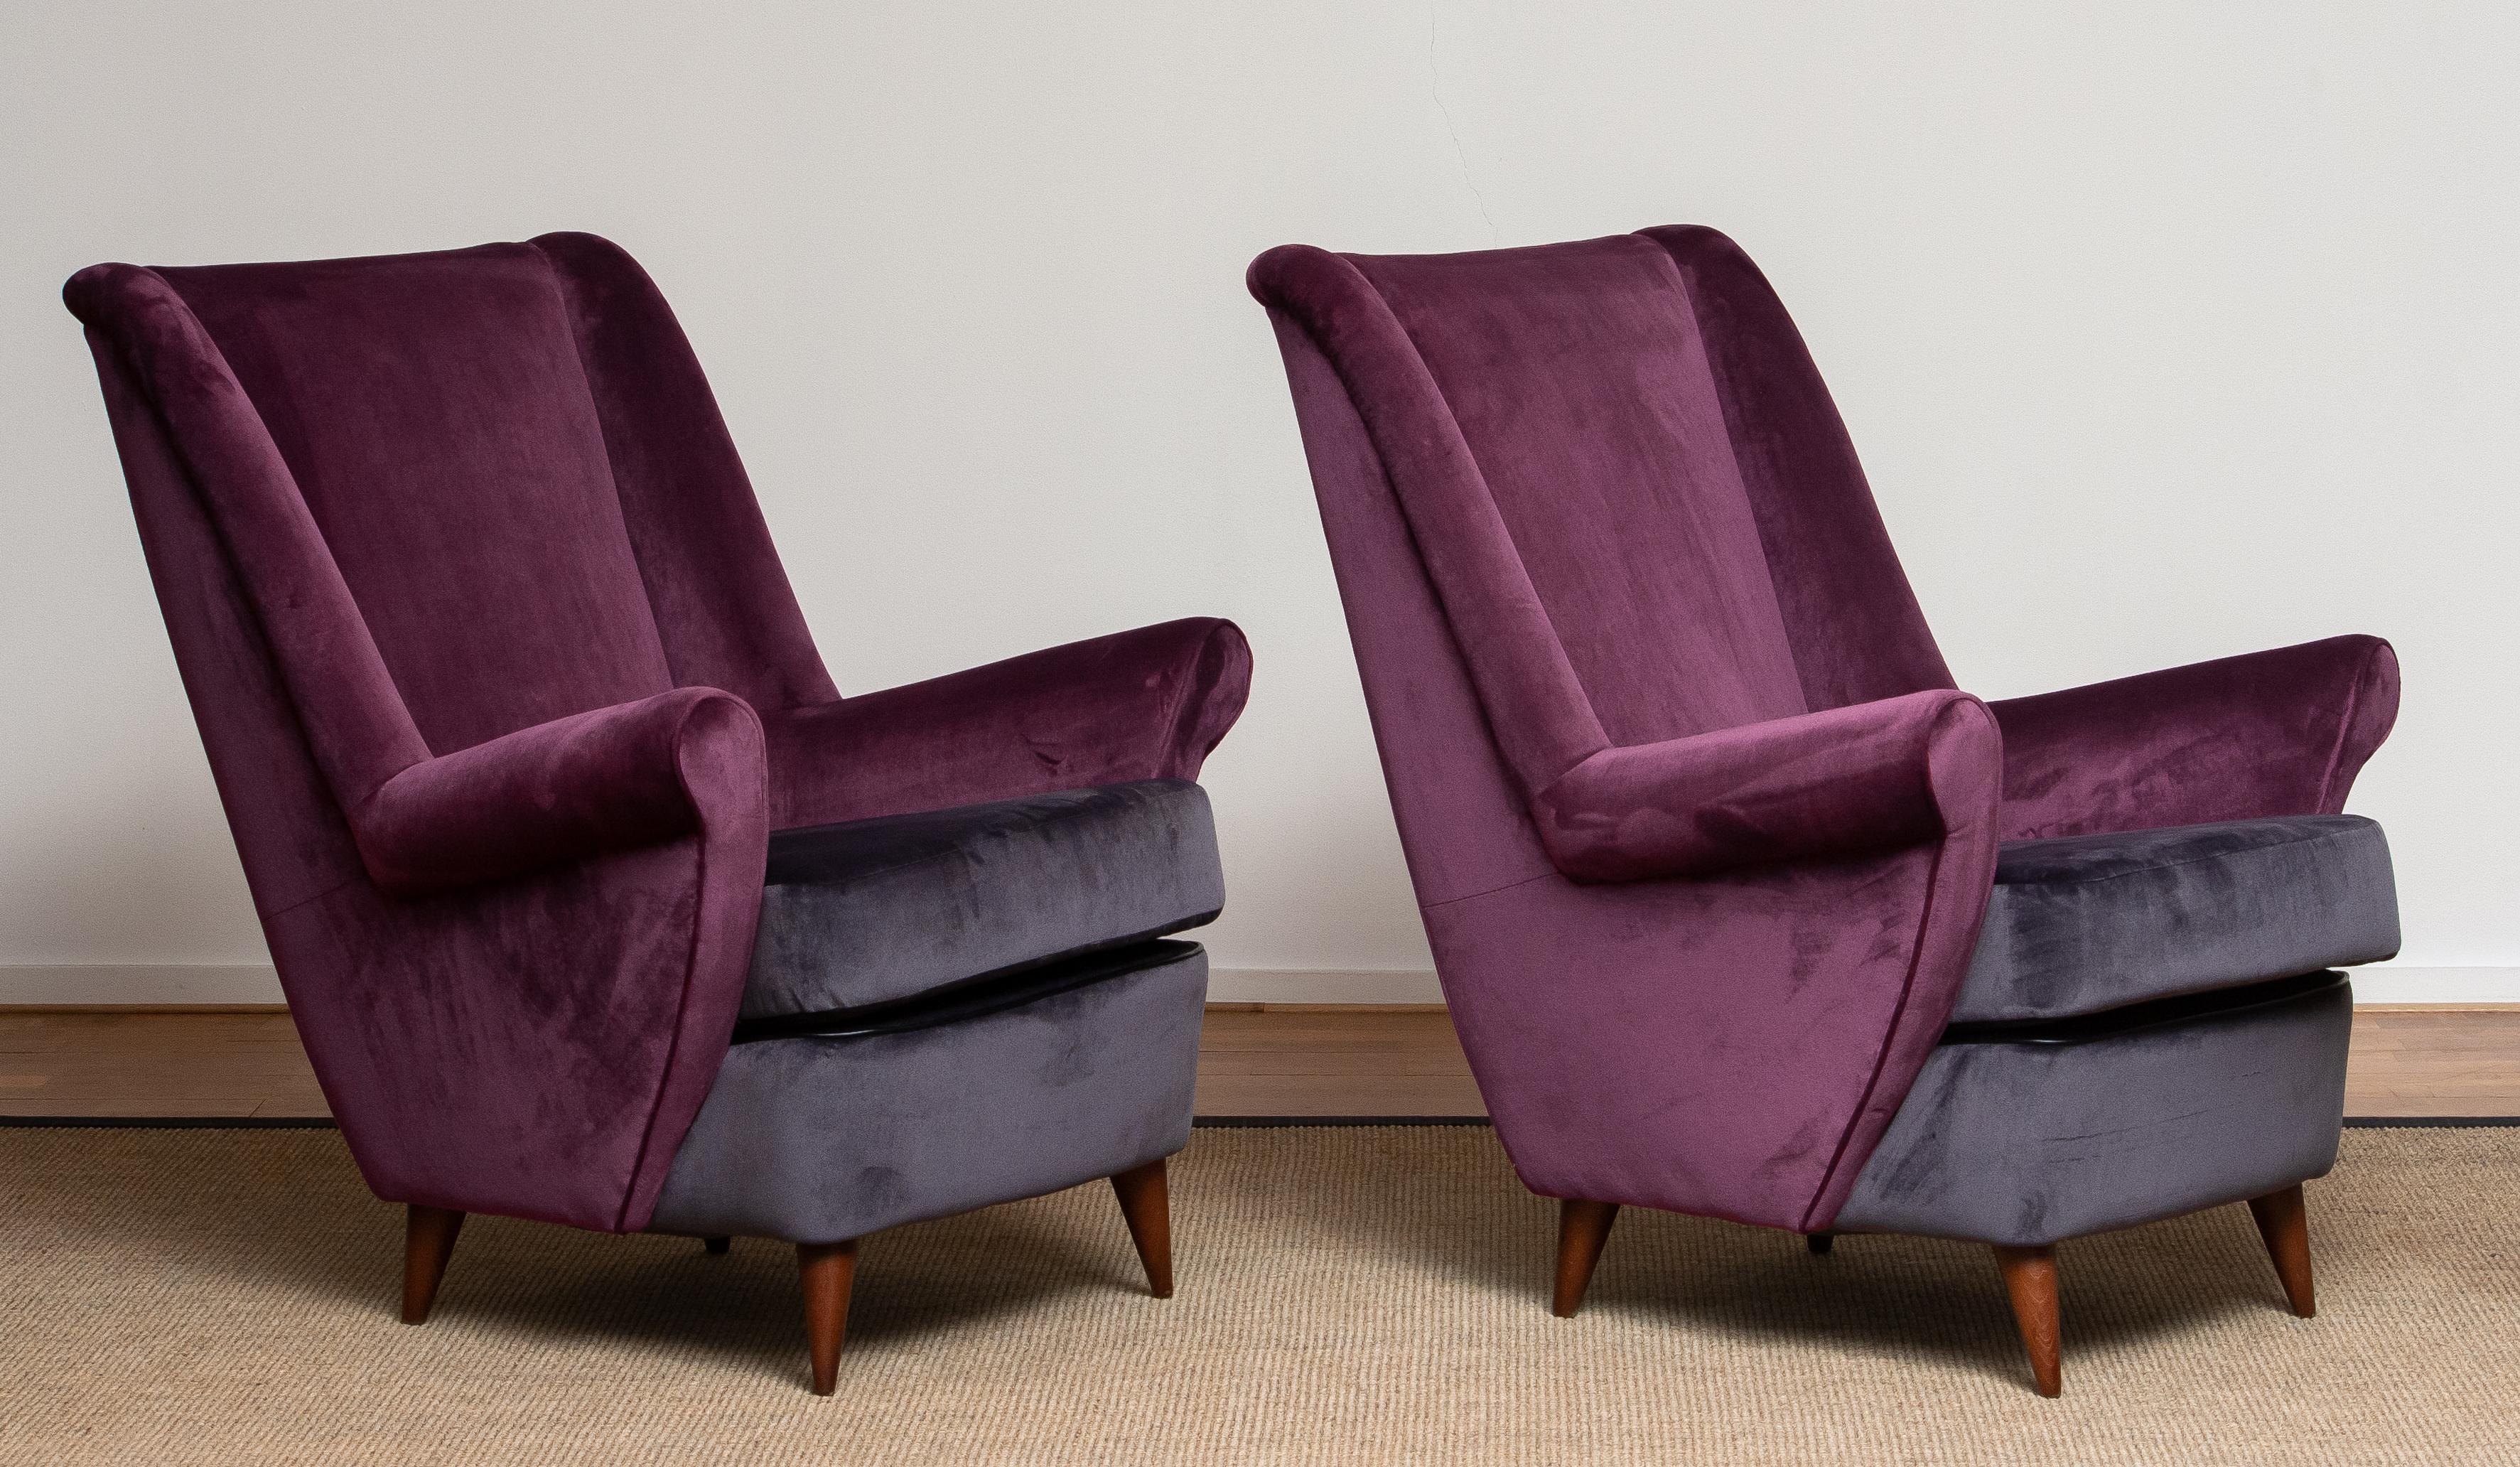 1950s Pair of Lounge / Easy Chairs Designed Gio Ponti Made by ISA Bergamo, Italy 3